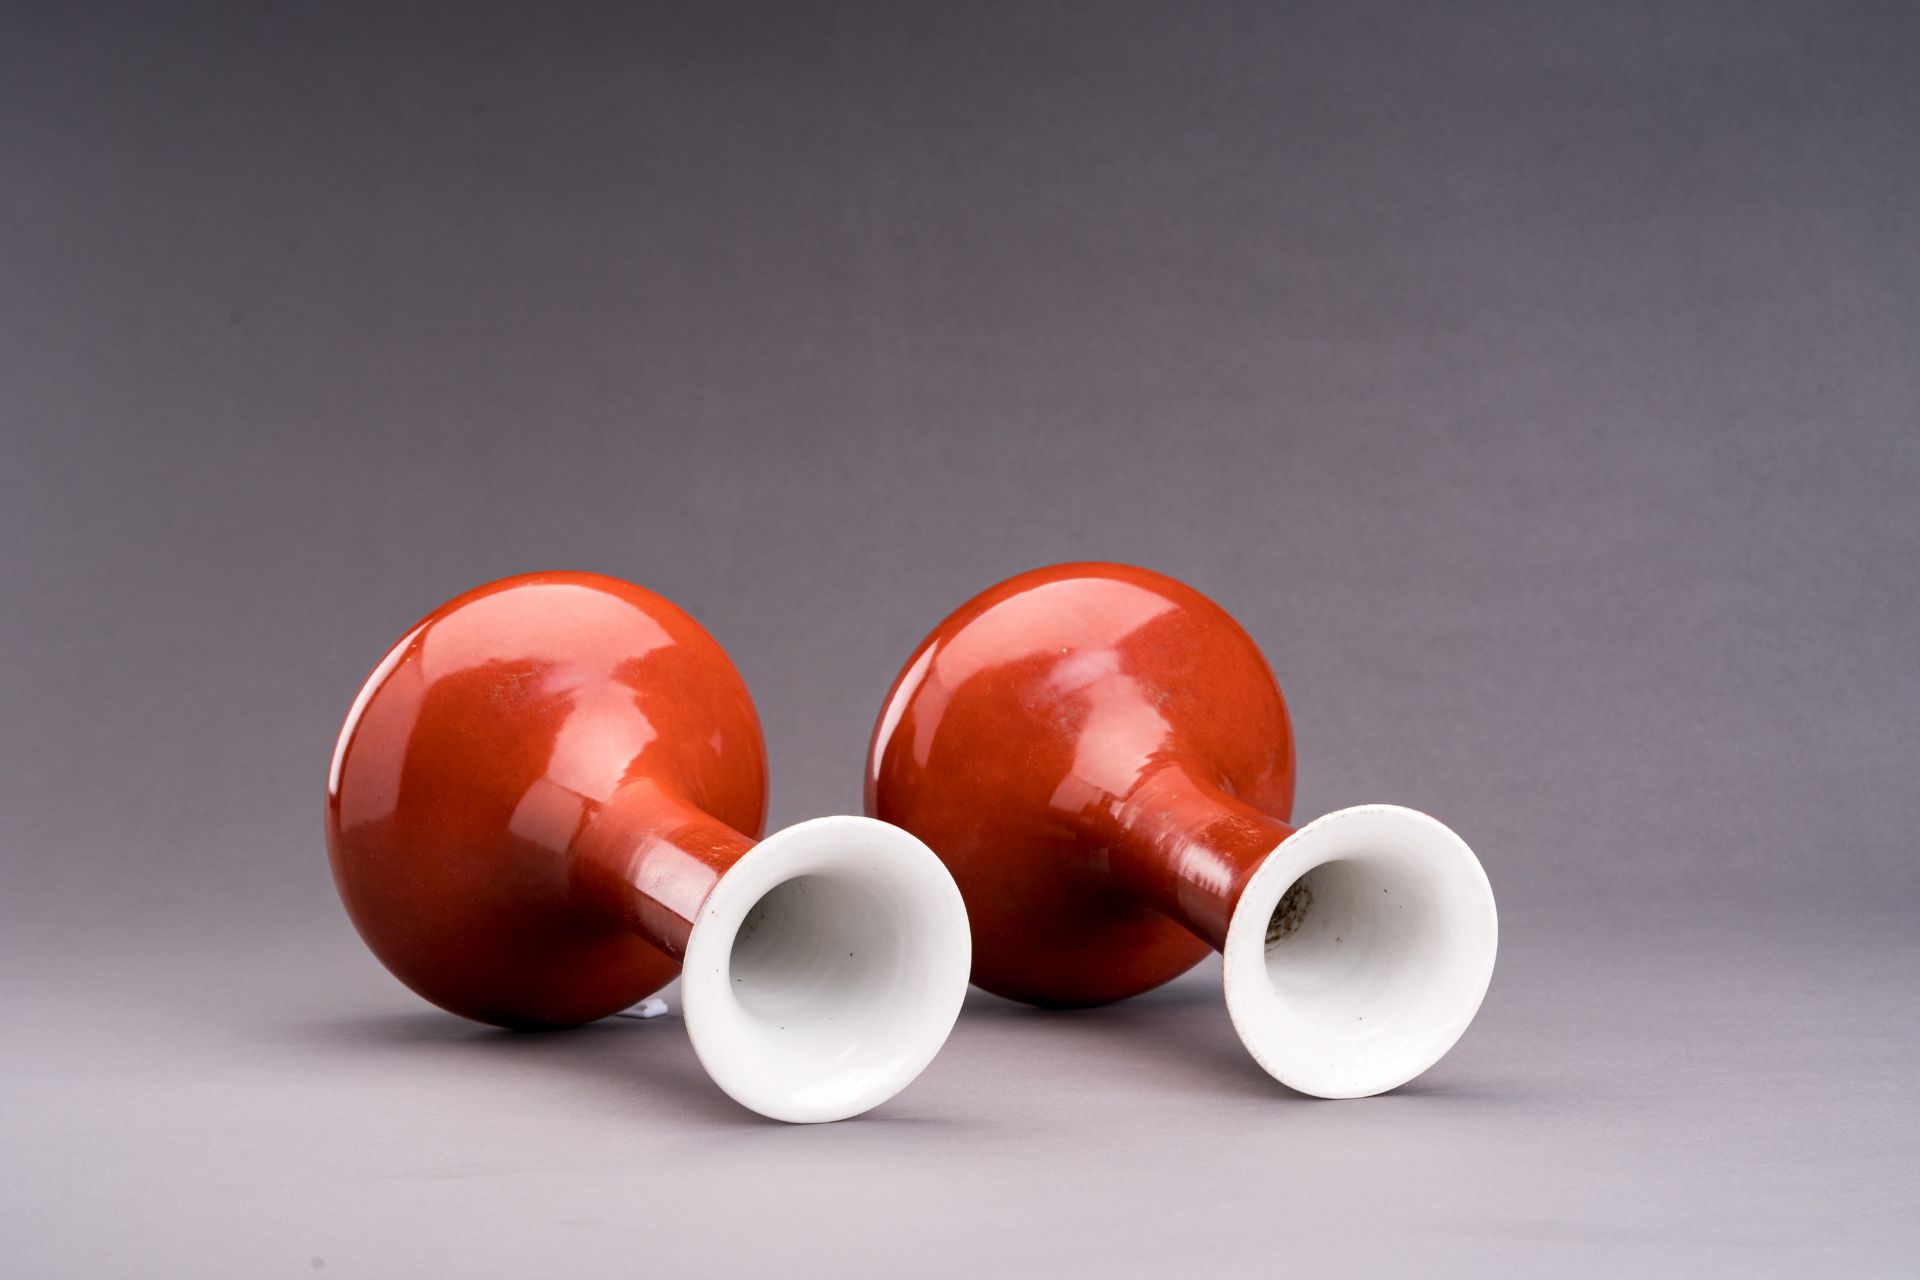 A PAIR OF A COPPER-RED PORCELAIN BOTTLE VASES - Image 5 of 6